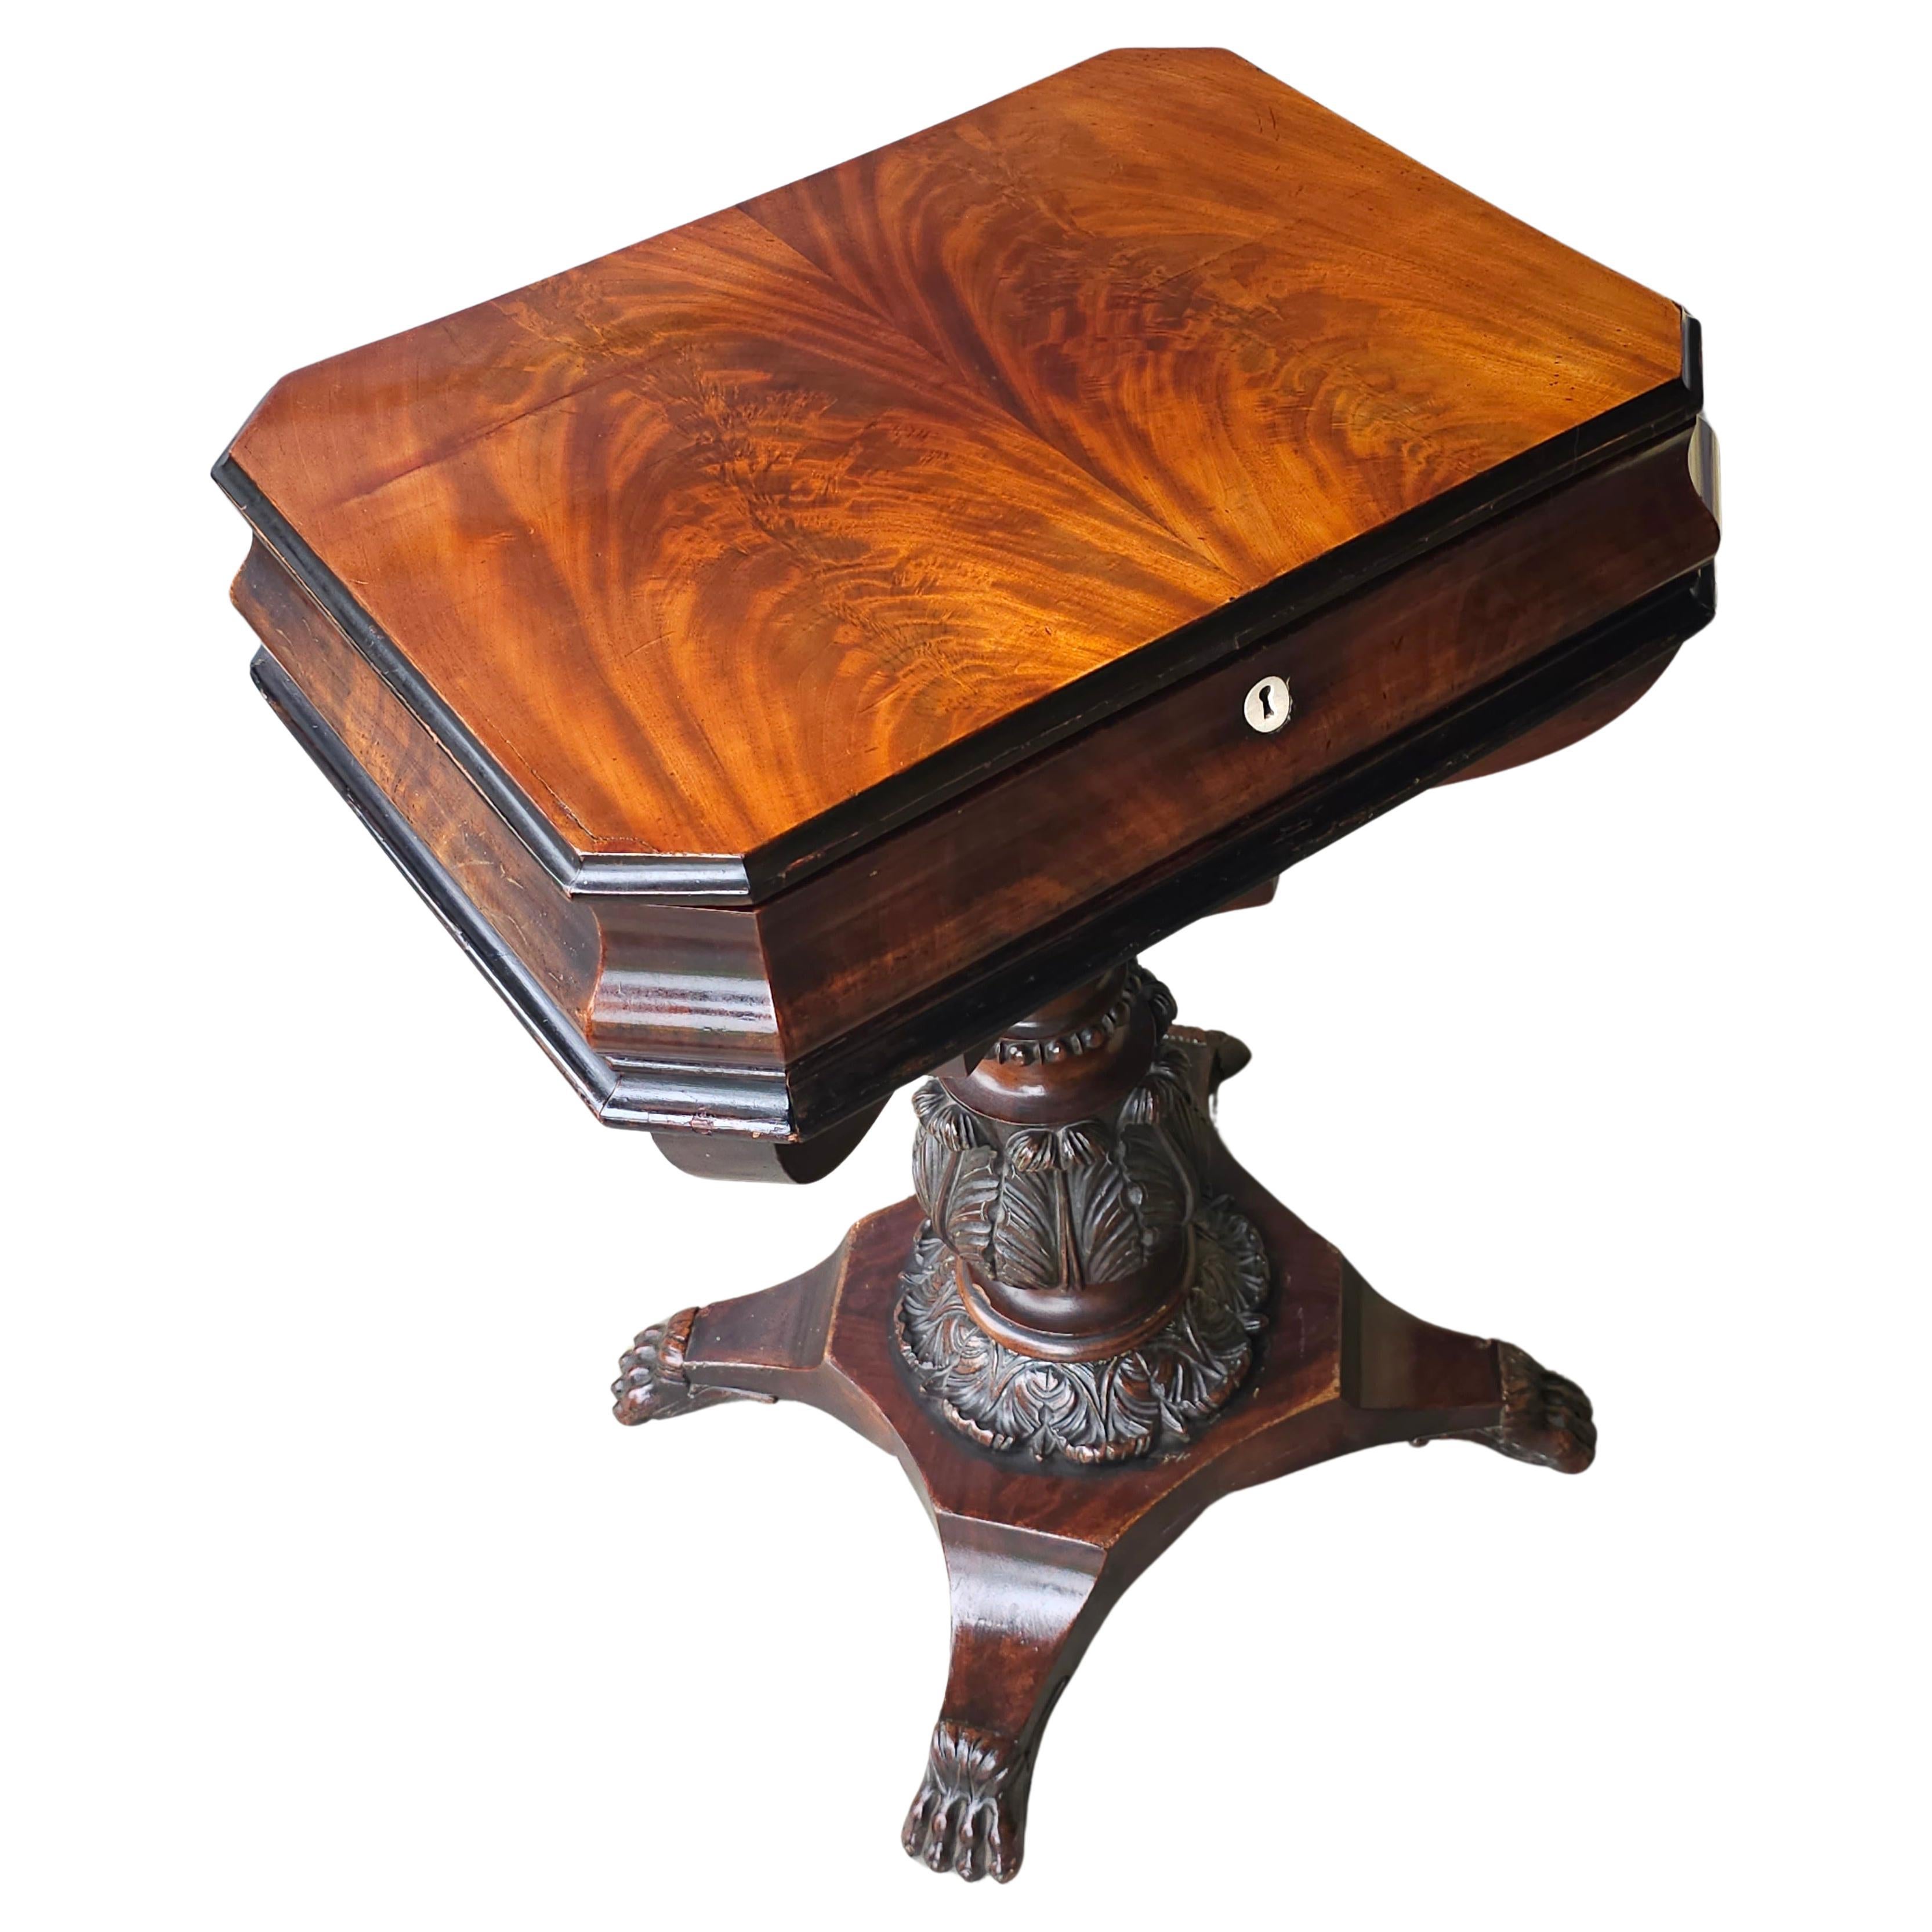 19th Century 19th C. George IV Partial Ebonized Bookmatched And Carved Mahogany Sewing Stand For Sale